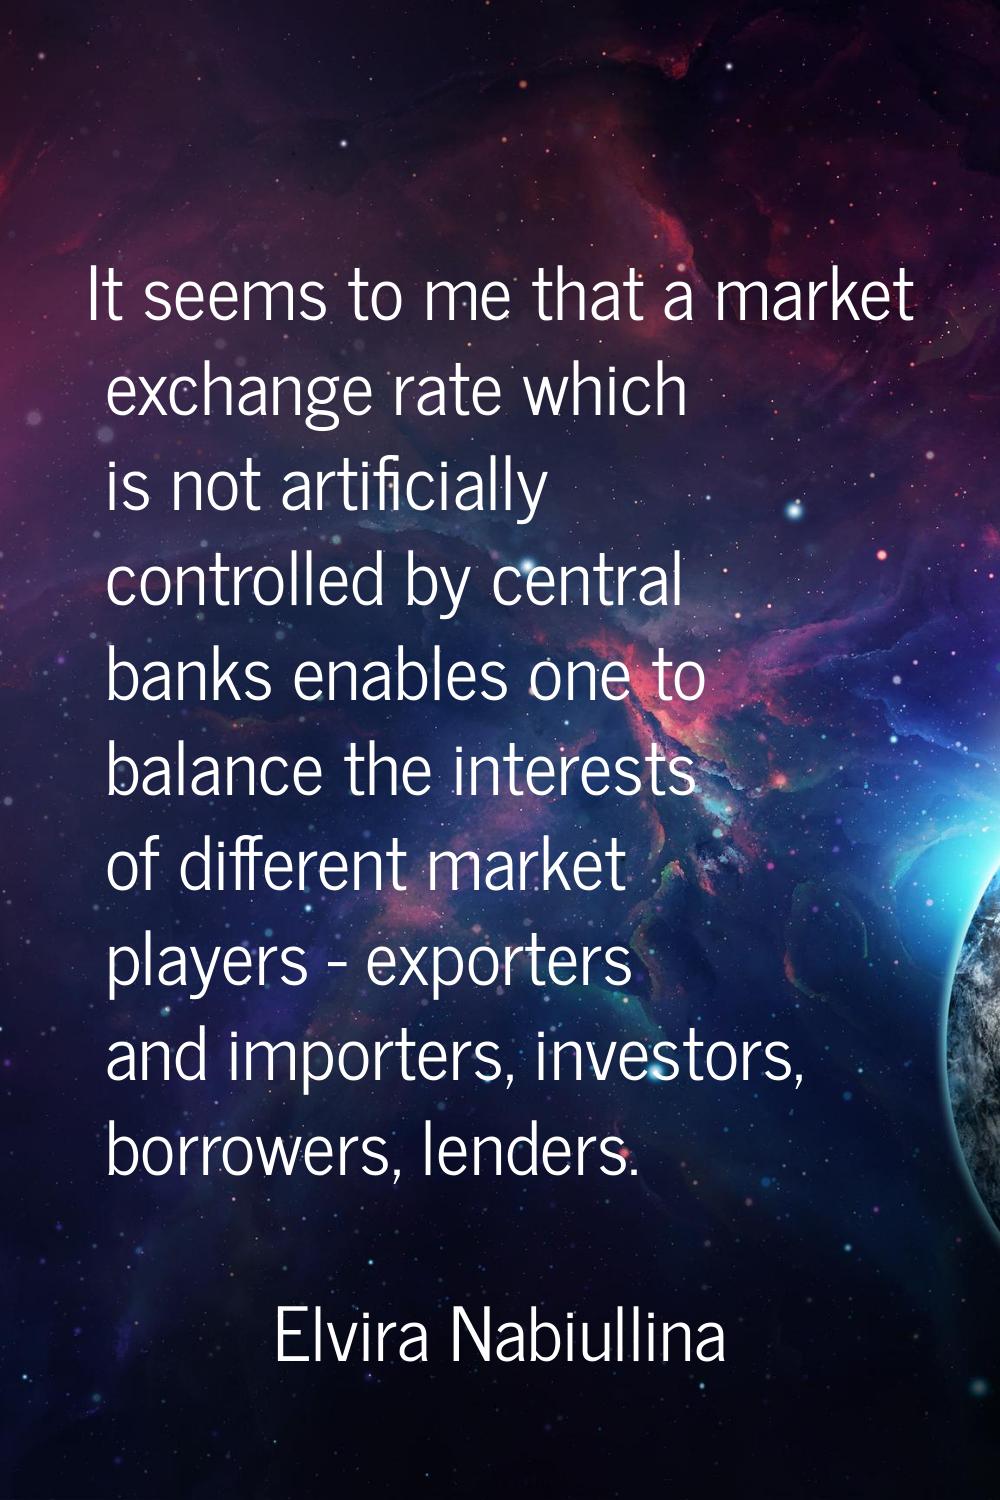 It seems to me that a market exchange rate which is not artificially controlled by central banks en